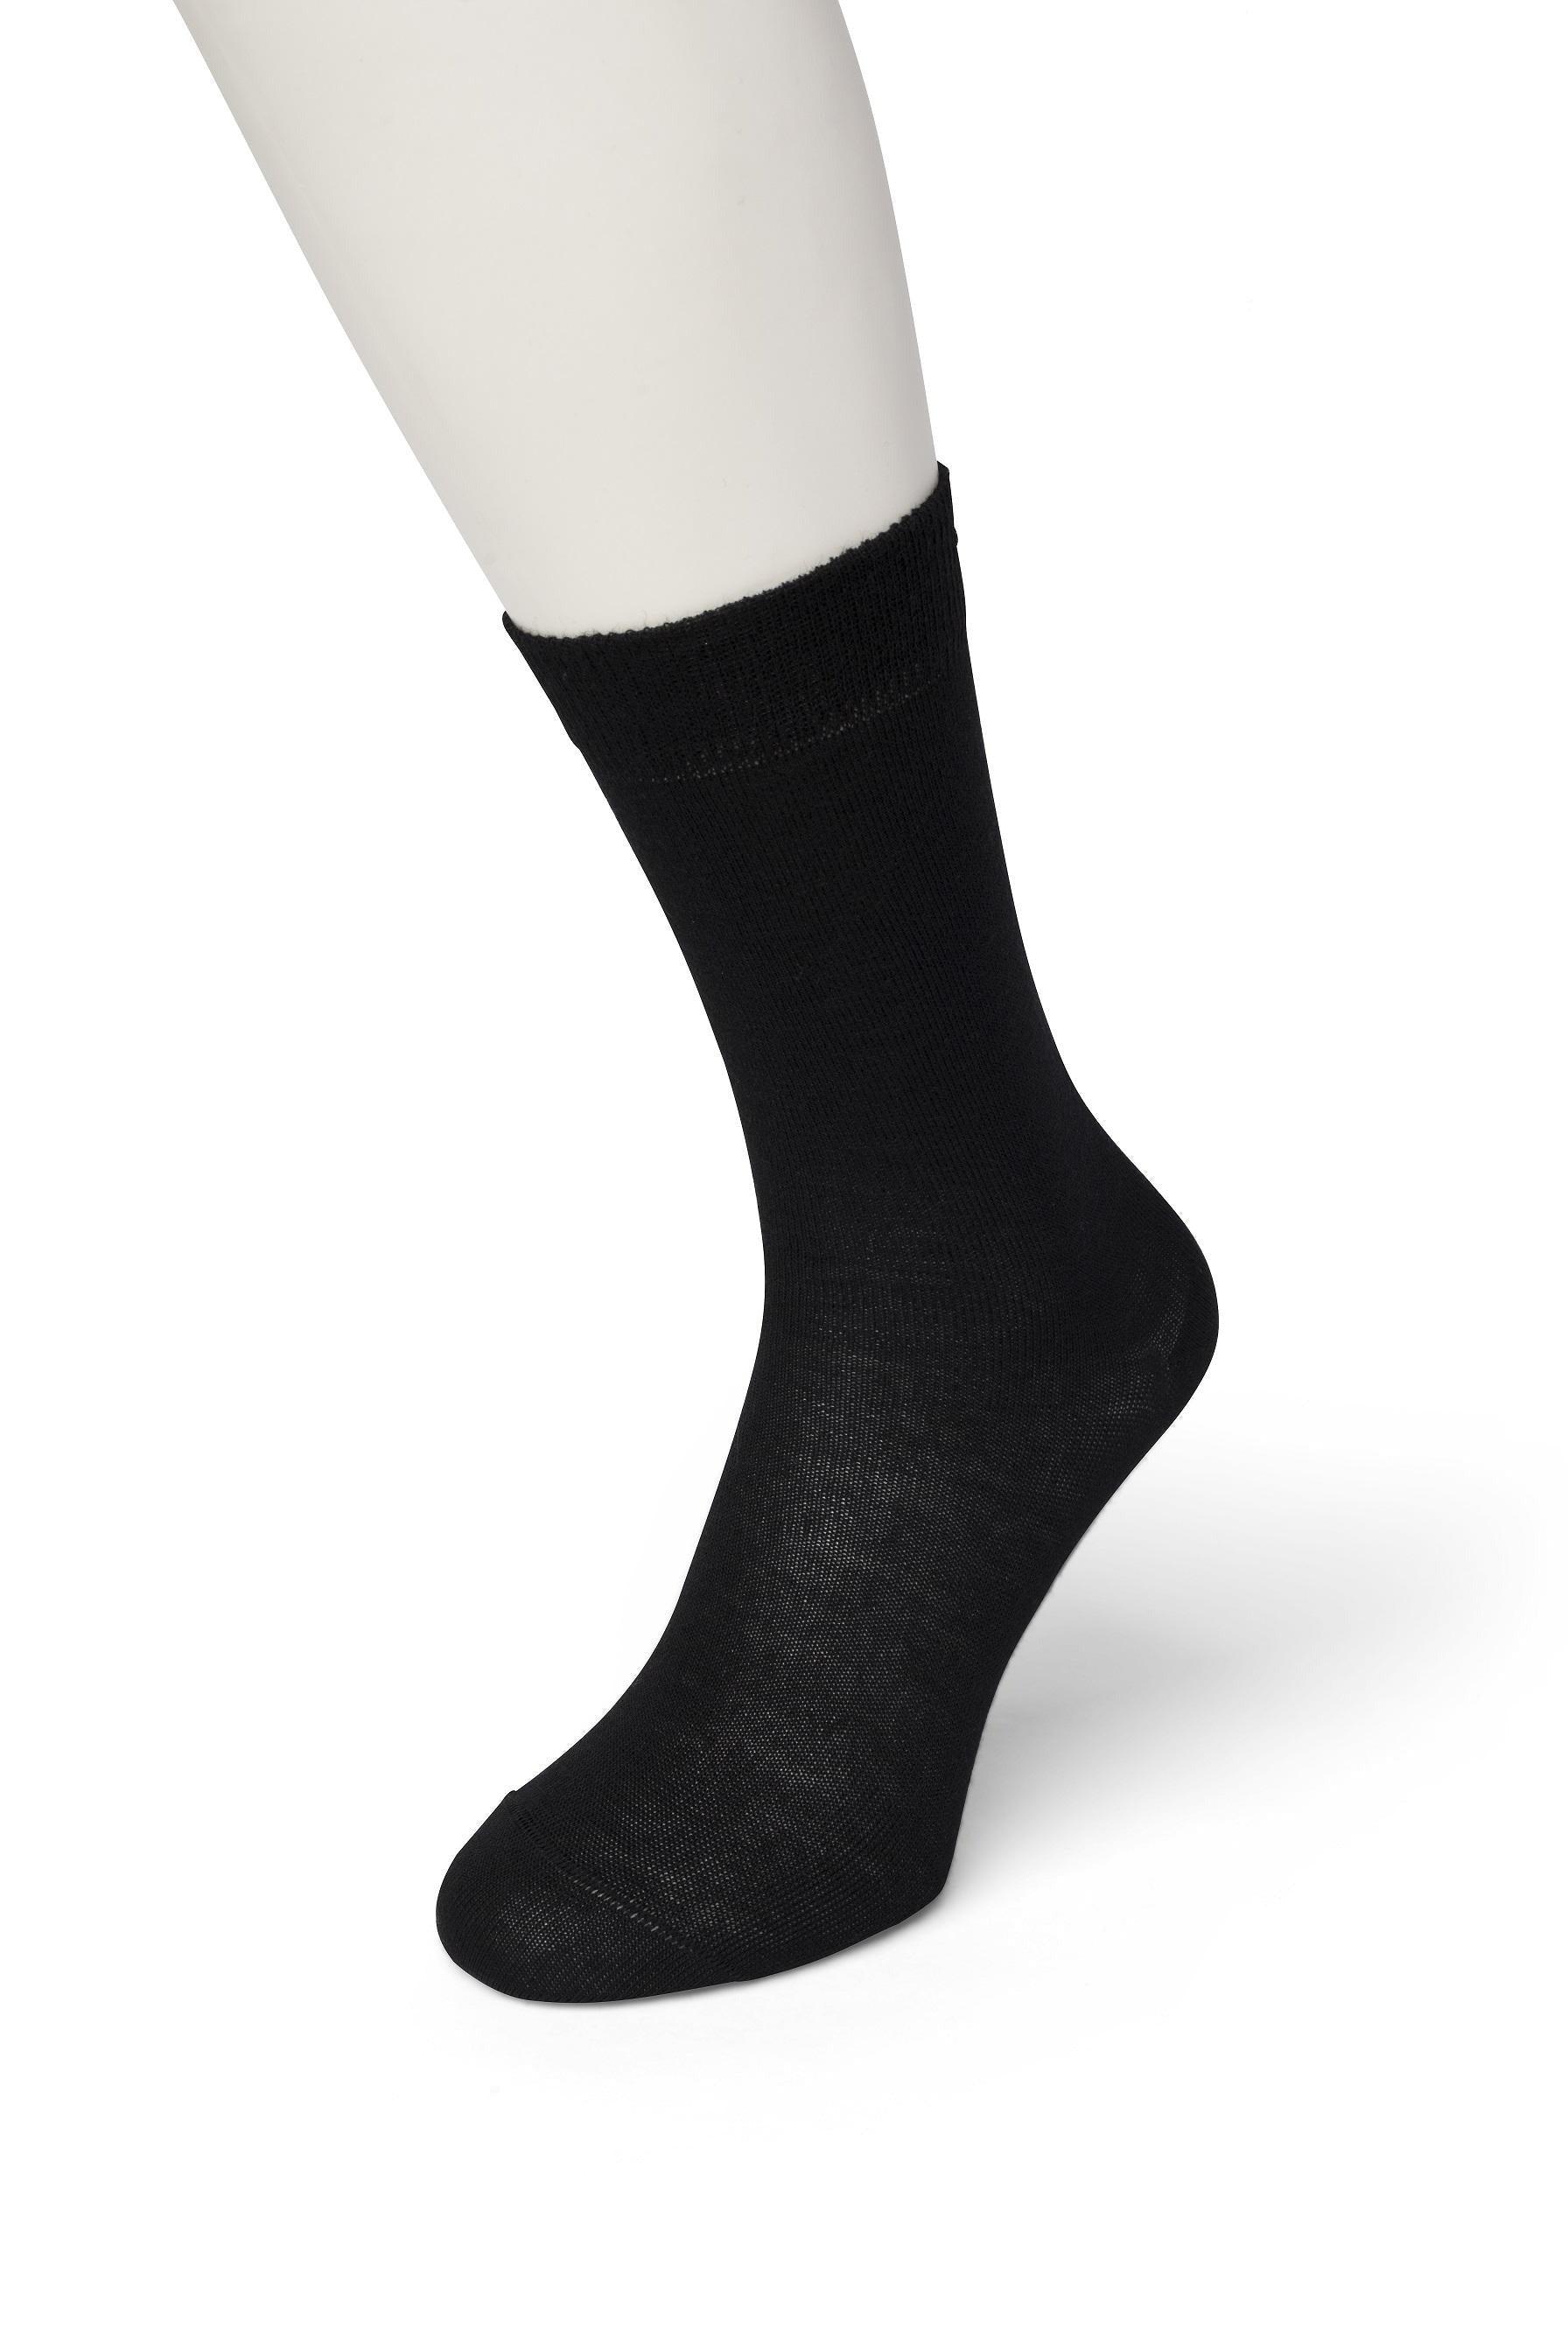 Bonnie Doon Wool/Cotton Sock BD631402 - black warm thermal ankle socks perfect for the cold Winter weather